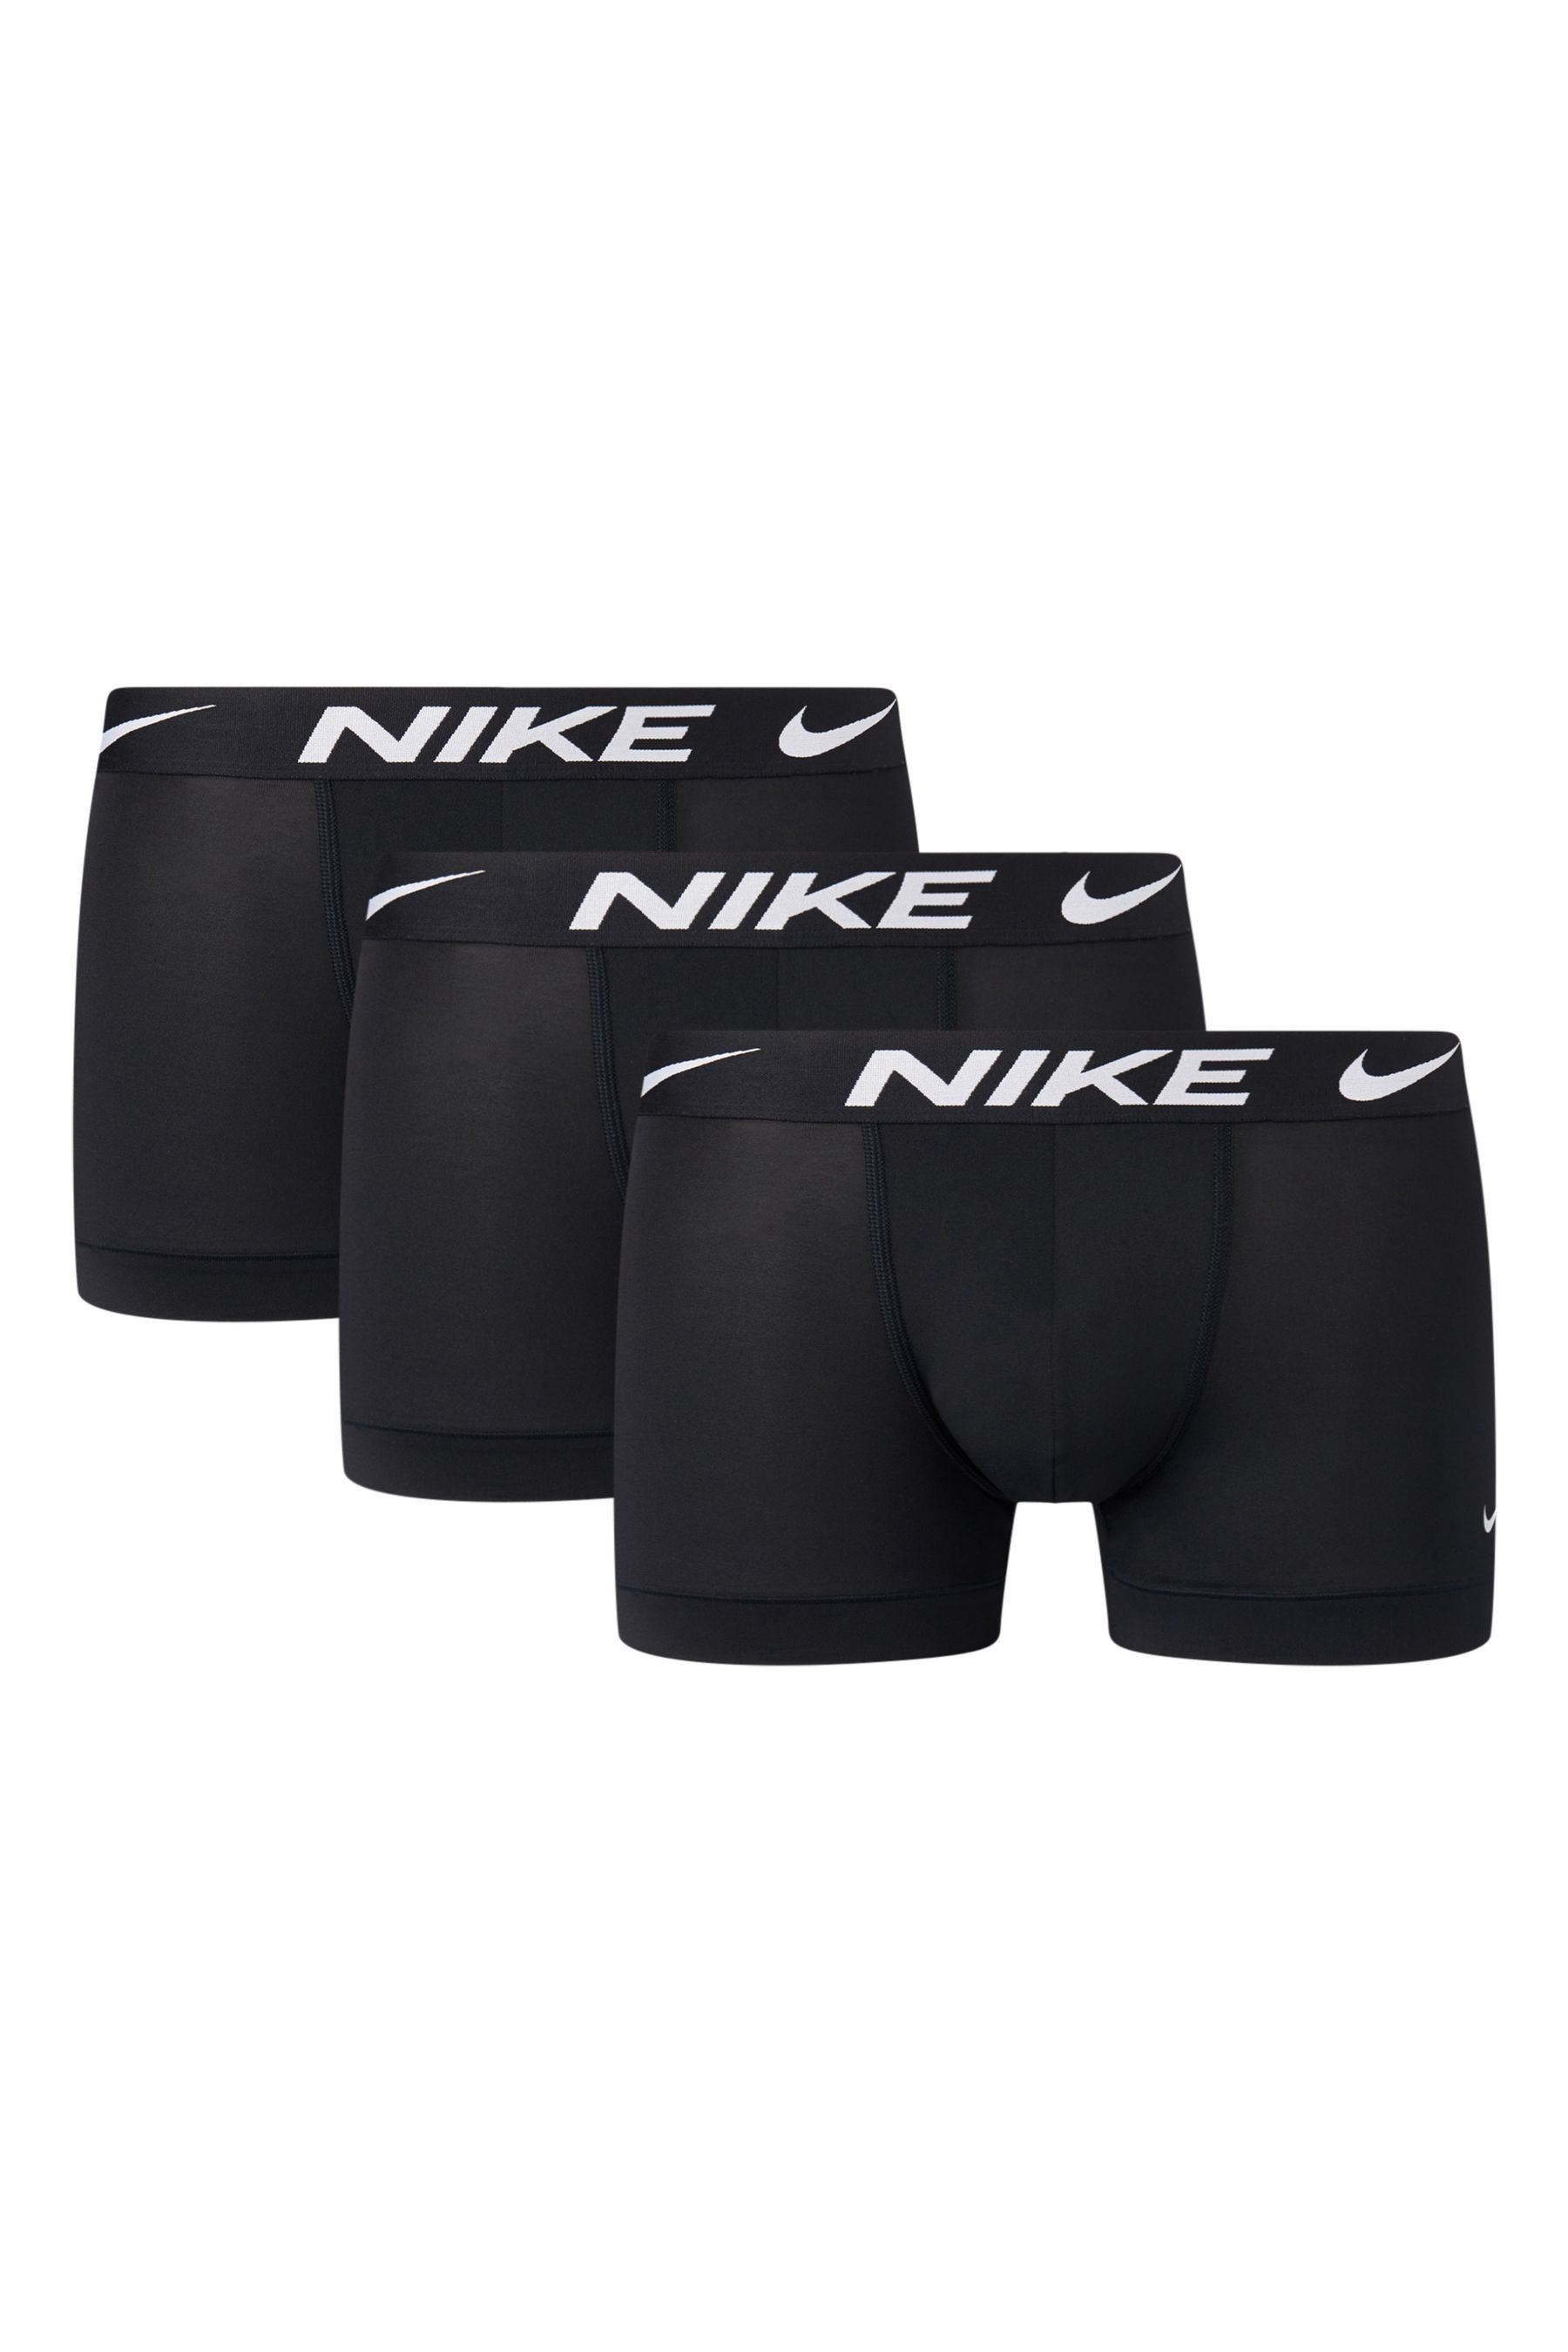 Buy Nike Black Essential Micro Trunks 3 Pack from the Next UK online shop